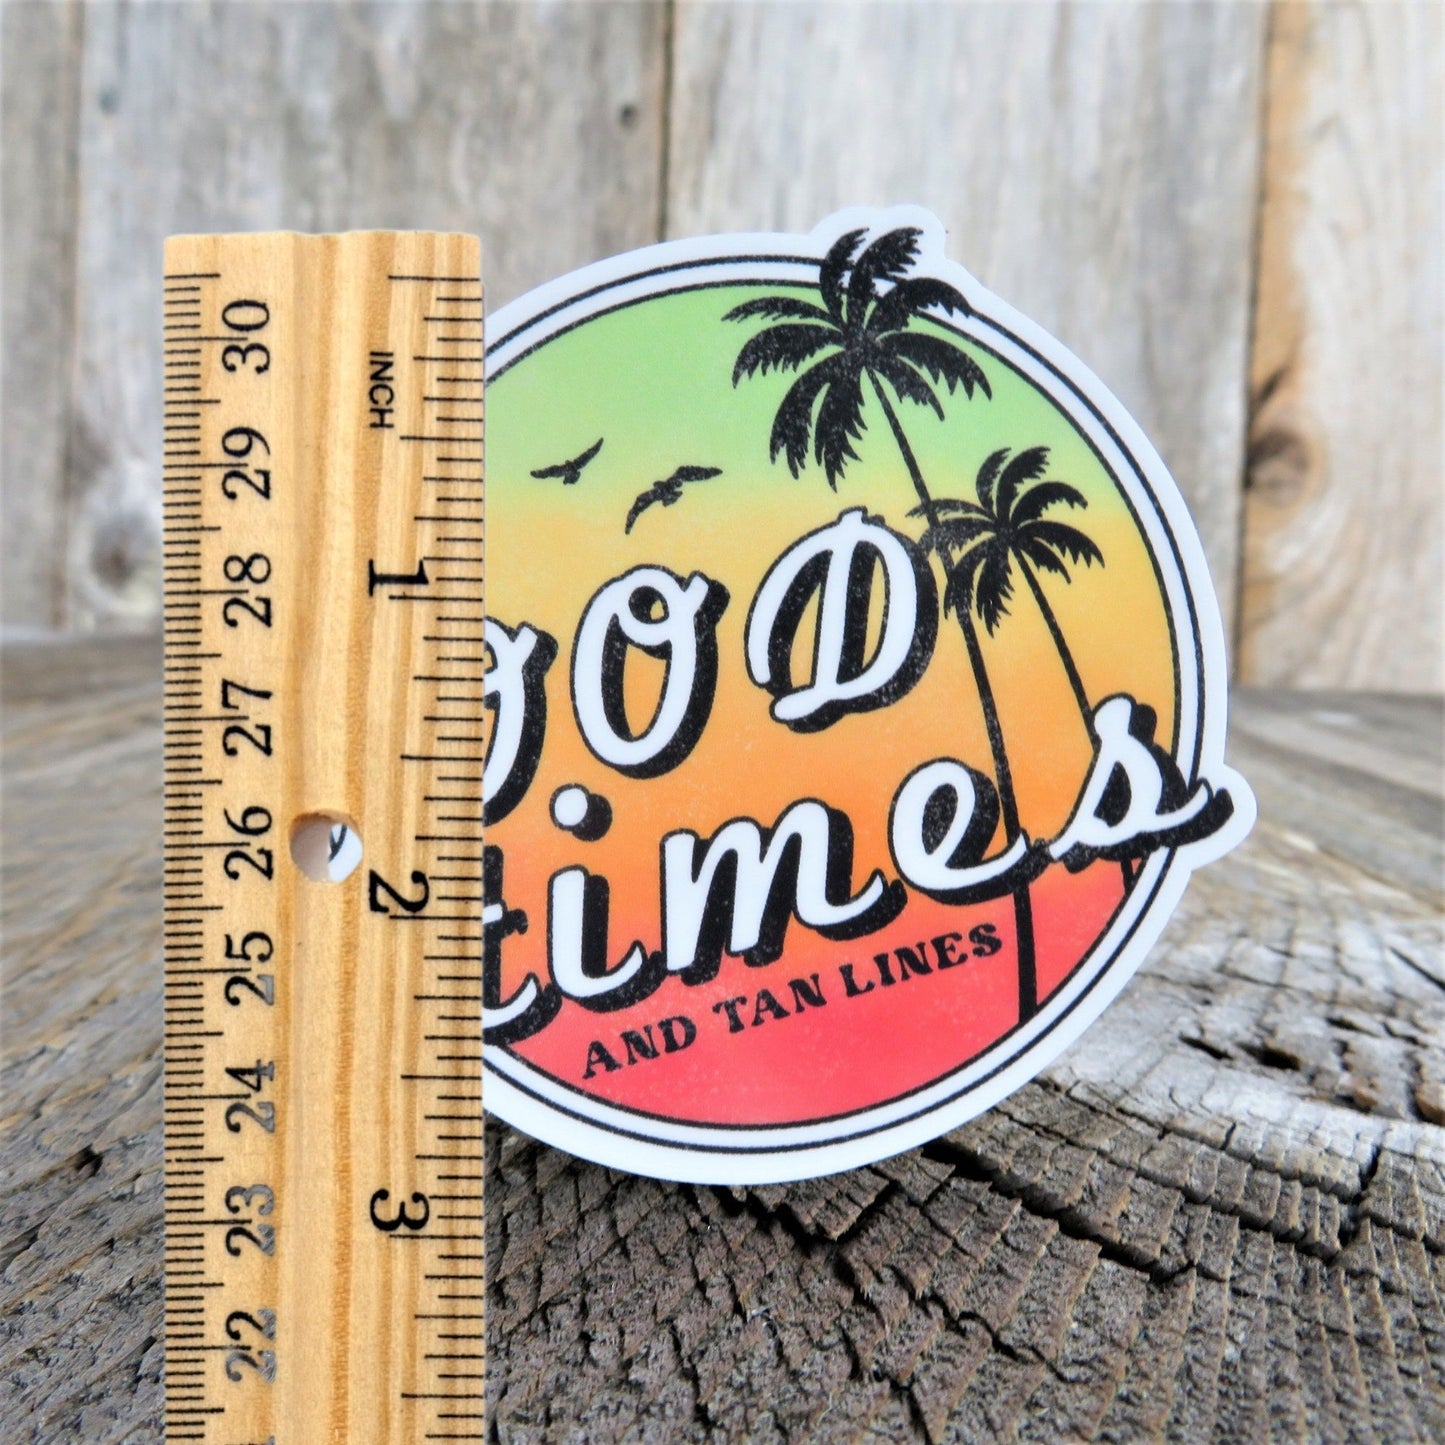 Good Times and Tan Lines Sticker Beach Summer Retro Colored Decal Palm Tree Waterproof Car Water Bottle Laptop